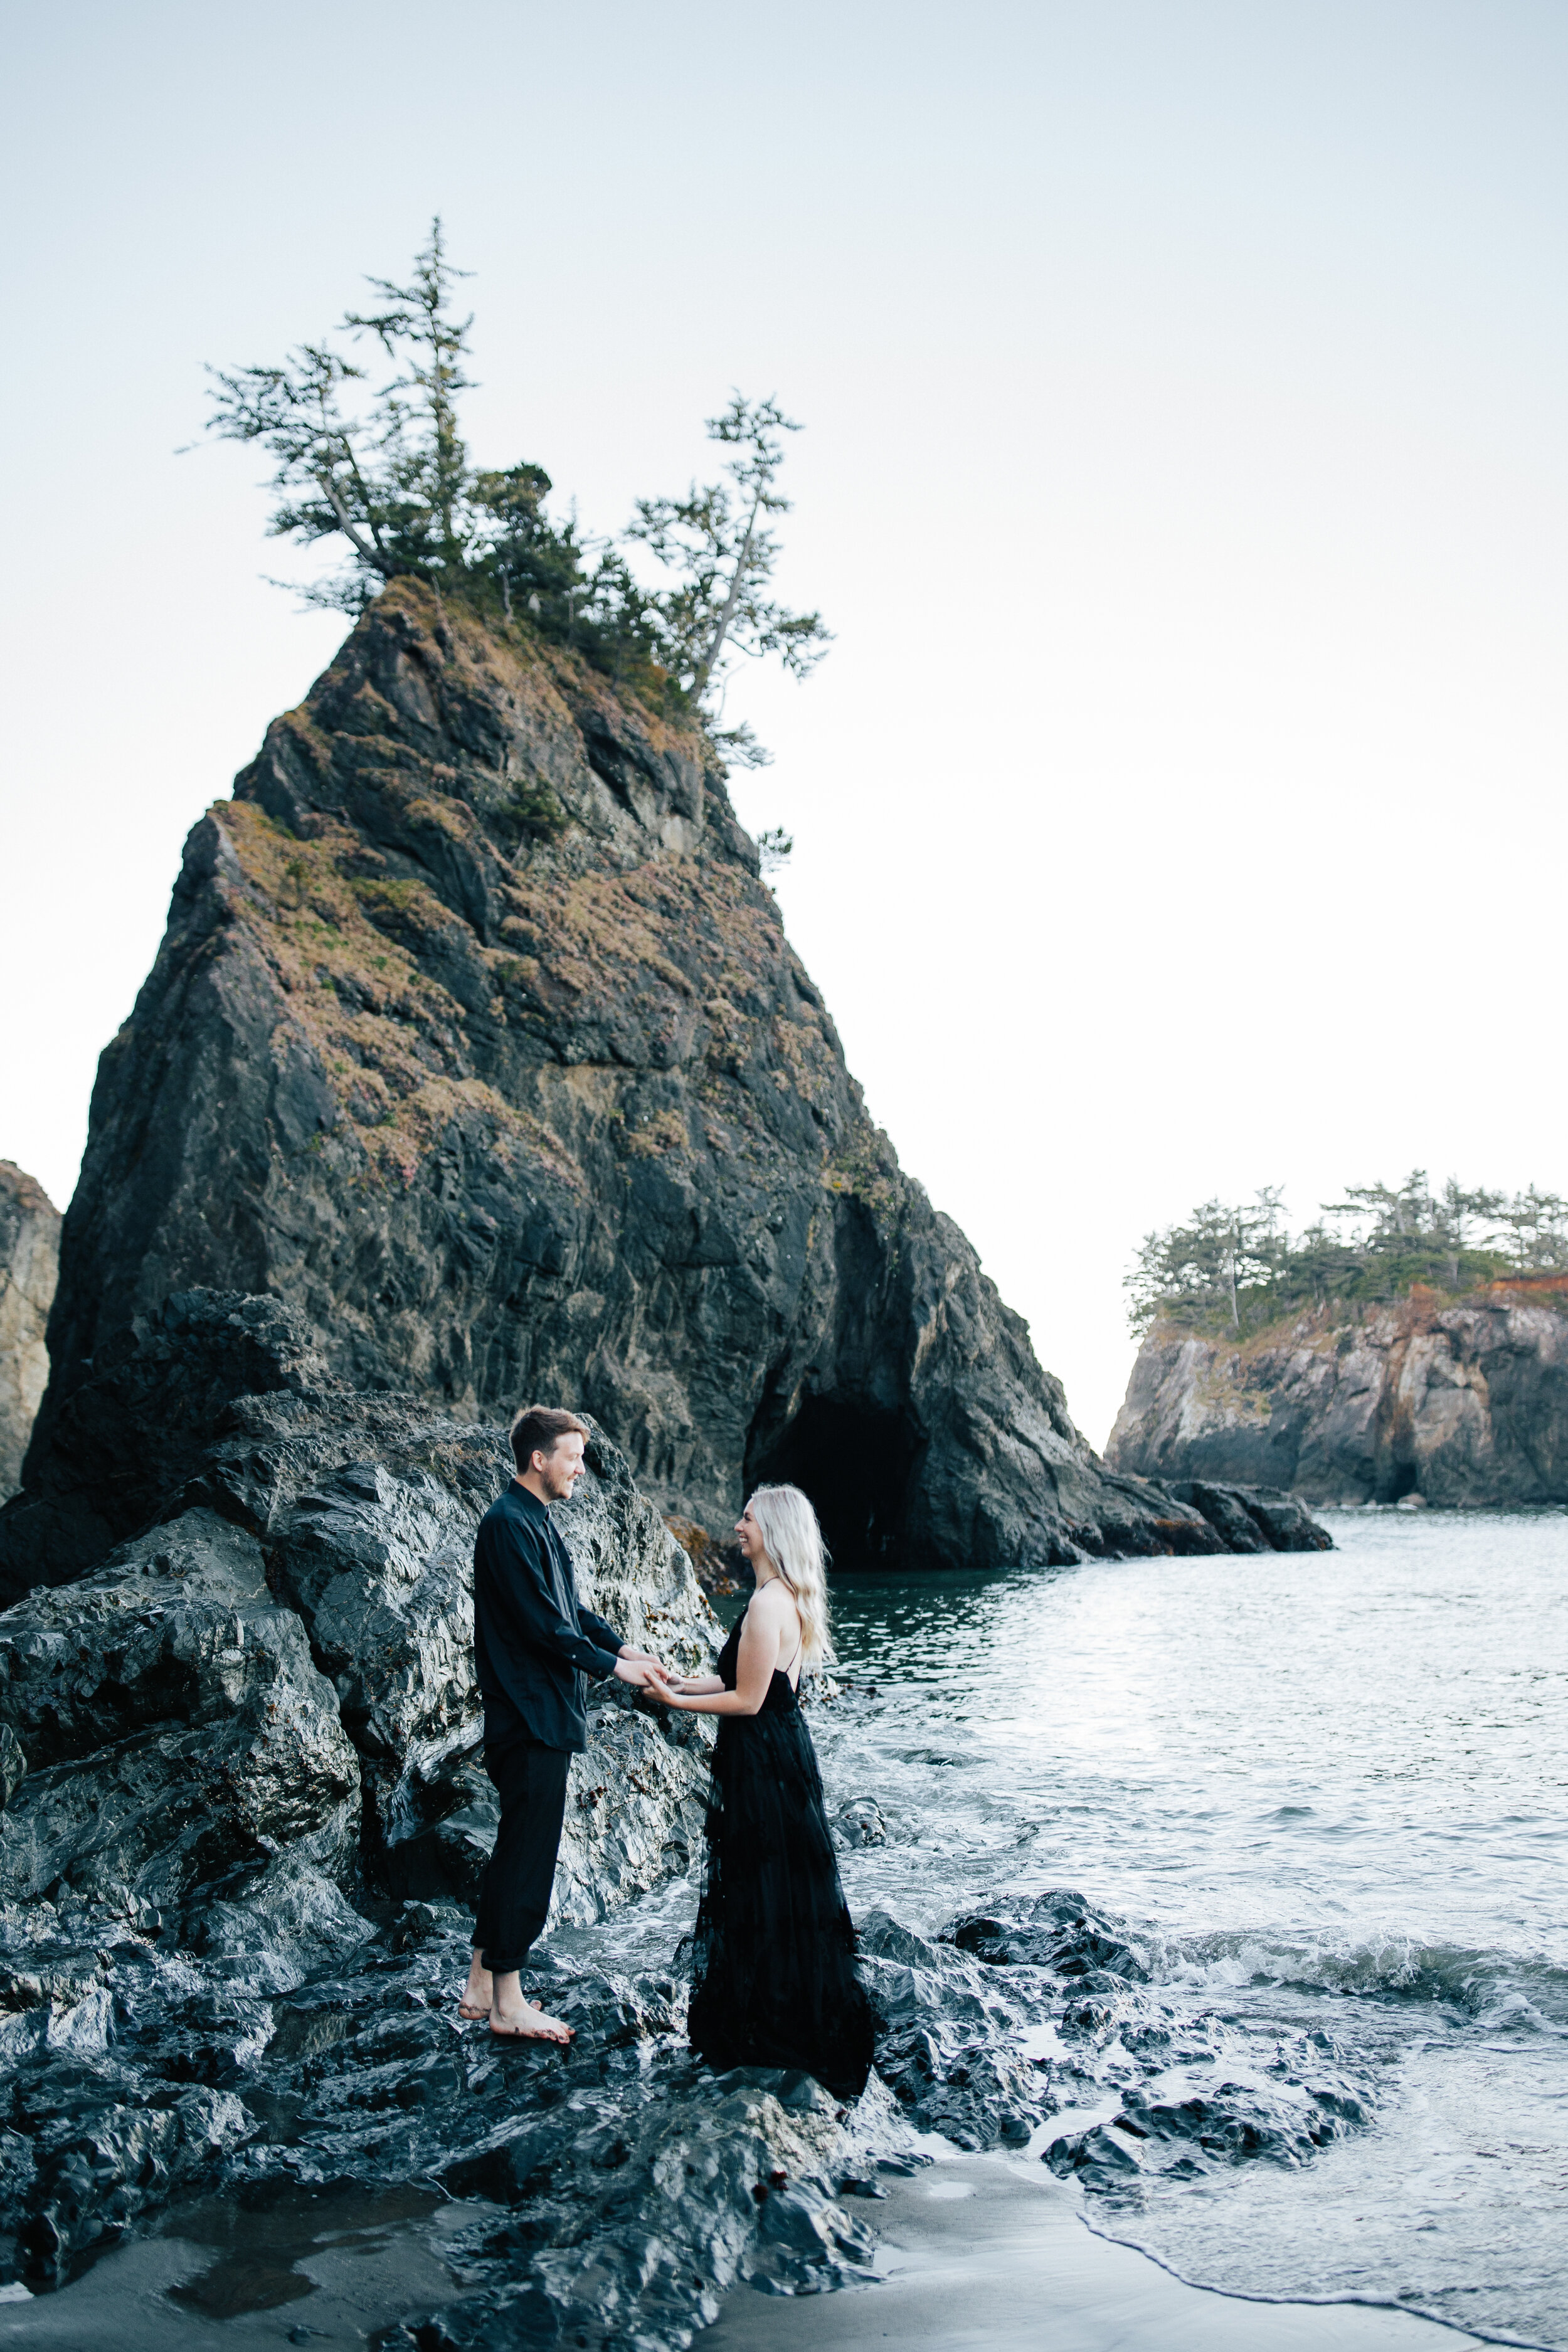  Samuel H Boardman Scenic Corridor southern Oregon coast elopement bride and groom saying their vows on the beach on the Oregon coast with sea stacks and the ocean below black bridal gown couple in all black a groom walks with his new bride #oregonph